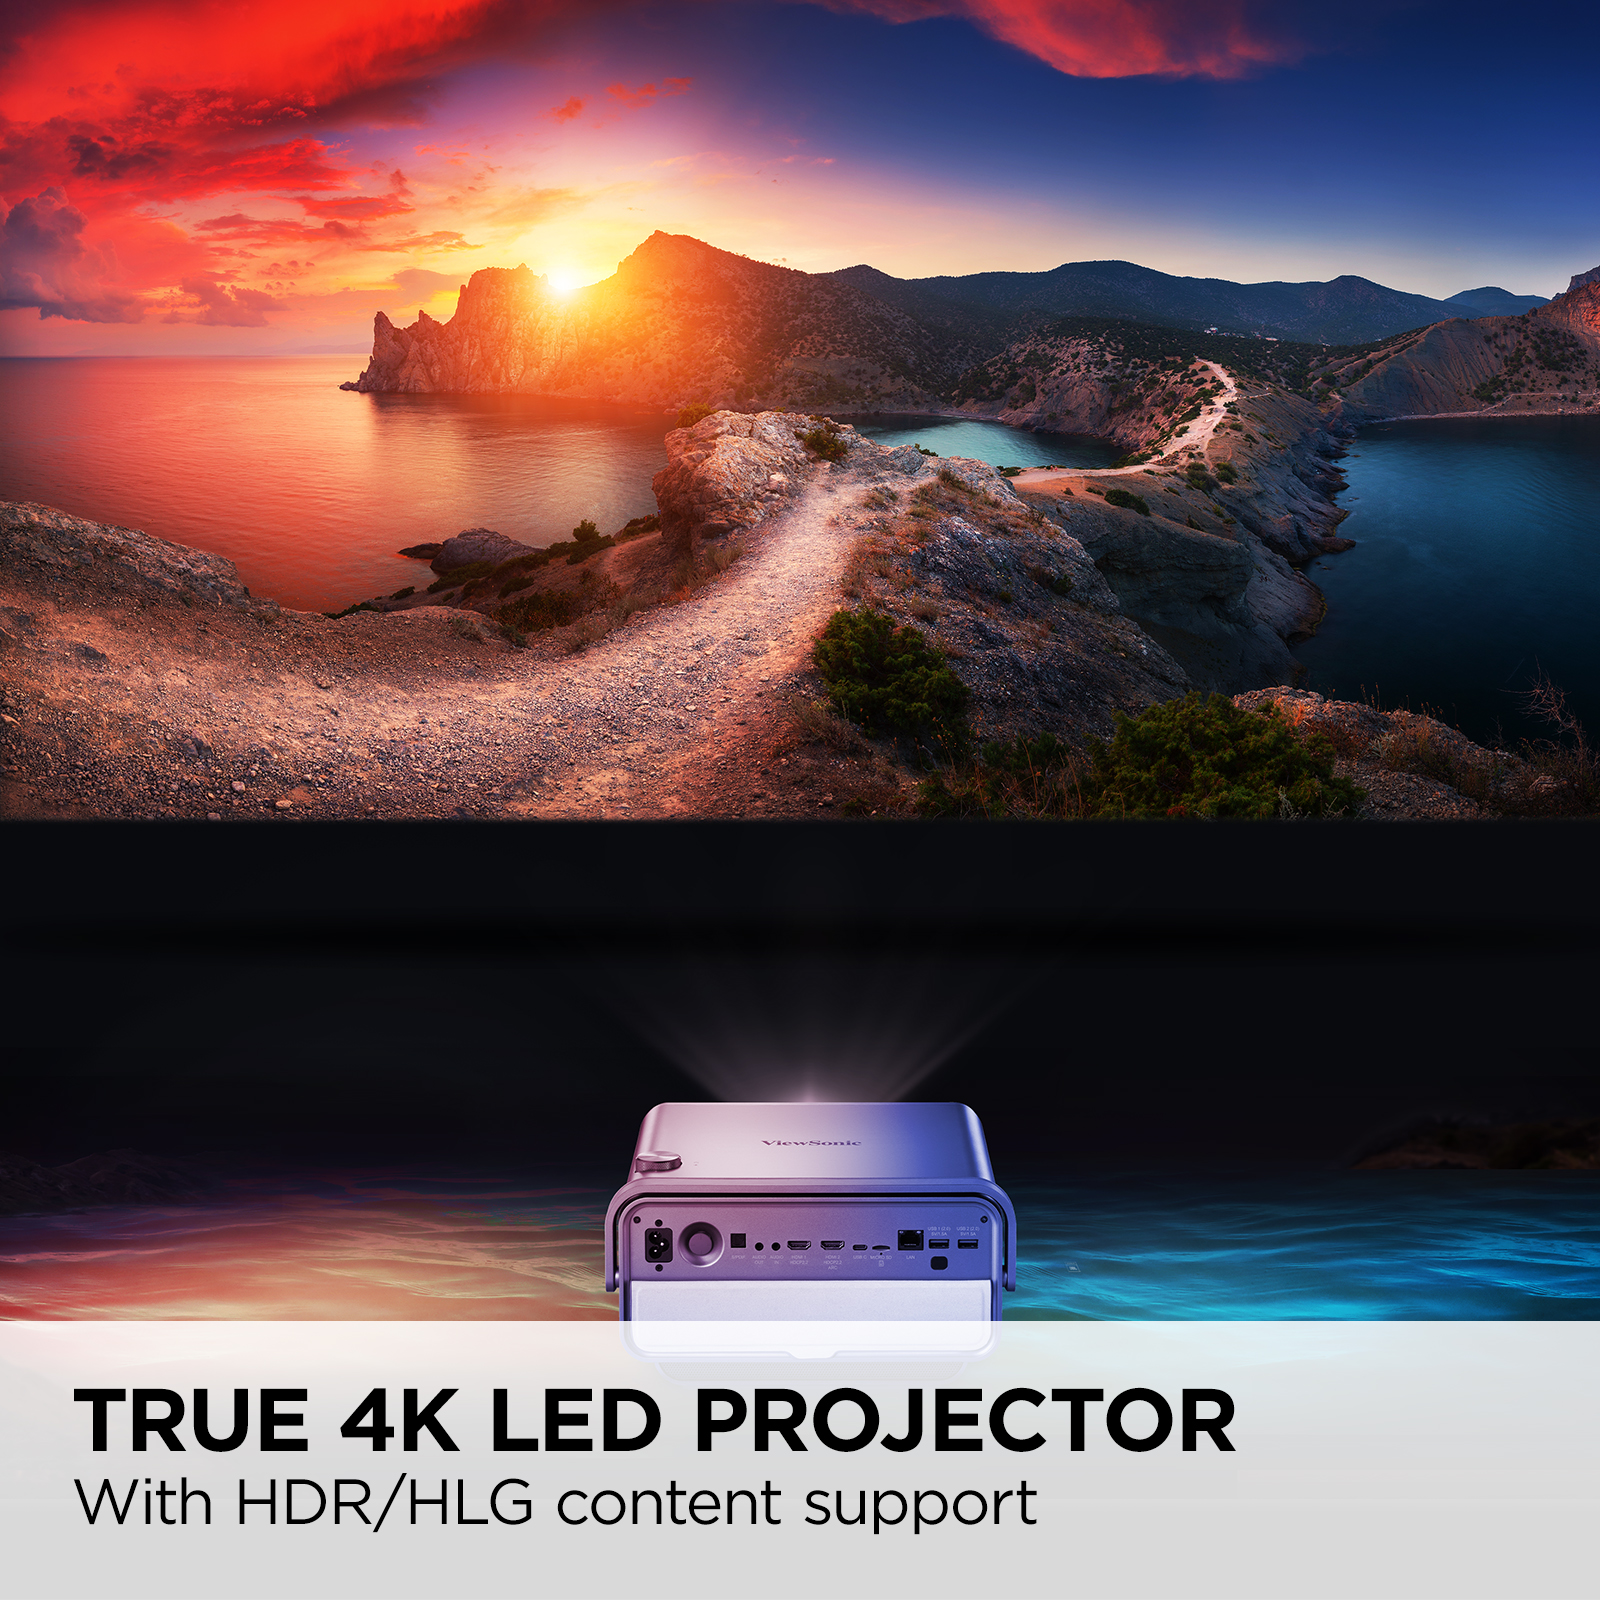 ViewSonic X11-4K True 4K UHD Short Throw LED Projector with H/V Keystone, Corner Adjustments, WiFi, USB C Connectivity, Cinematic SuperColor for Smart Home Theater - image 2 of 8